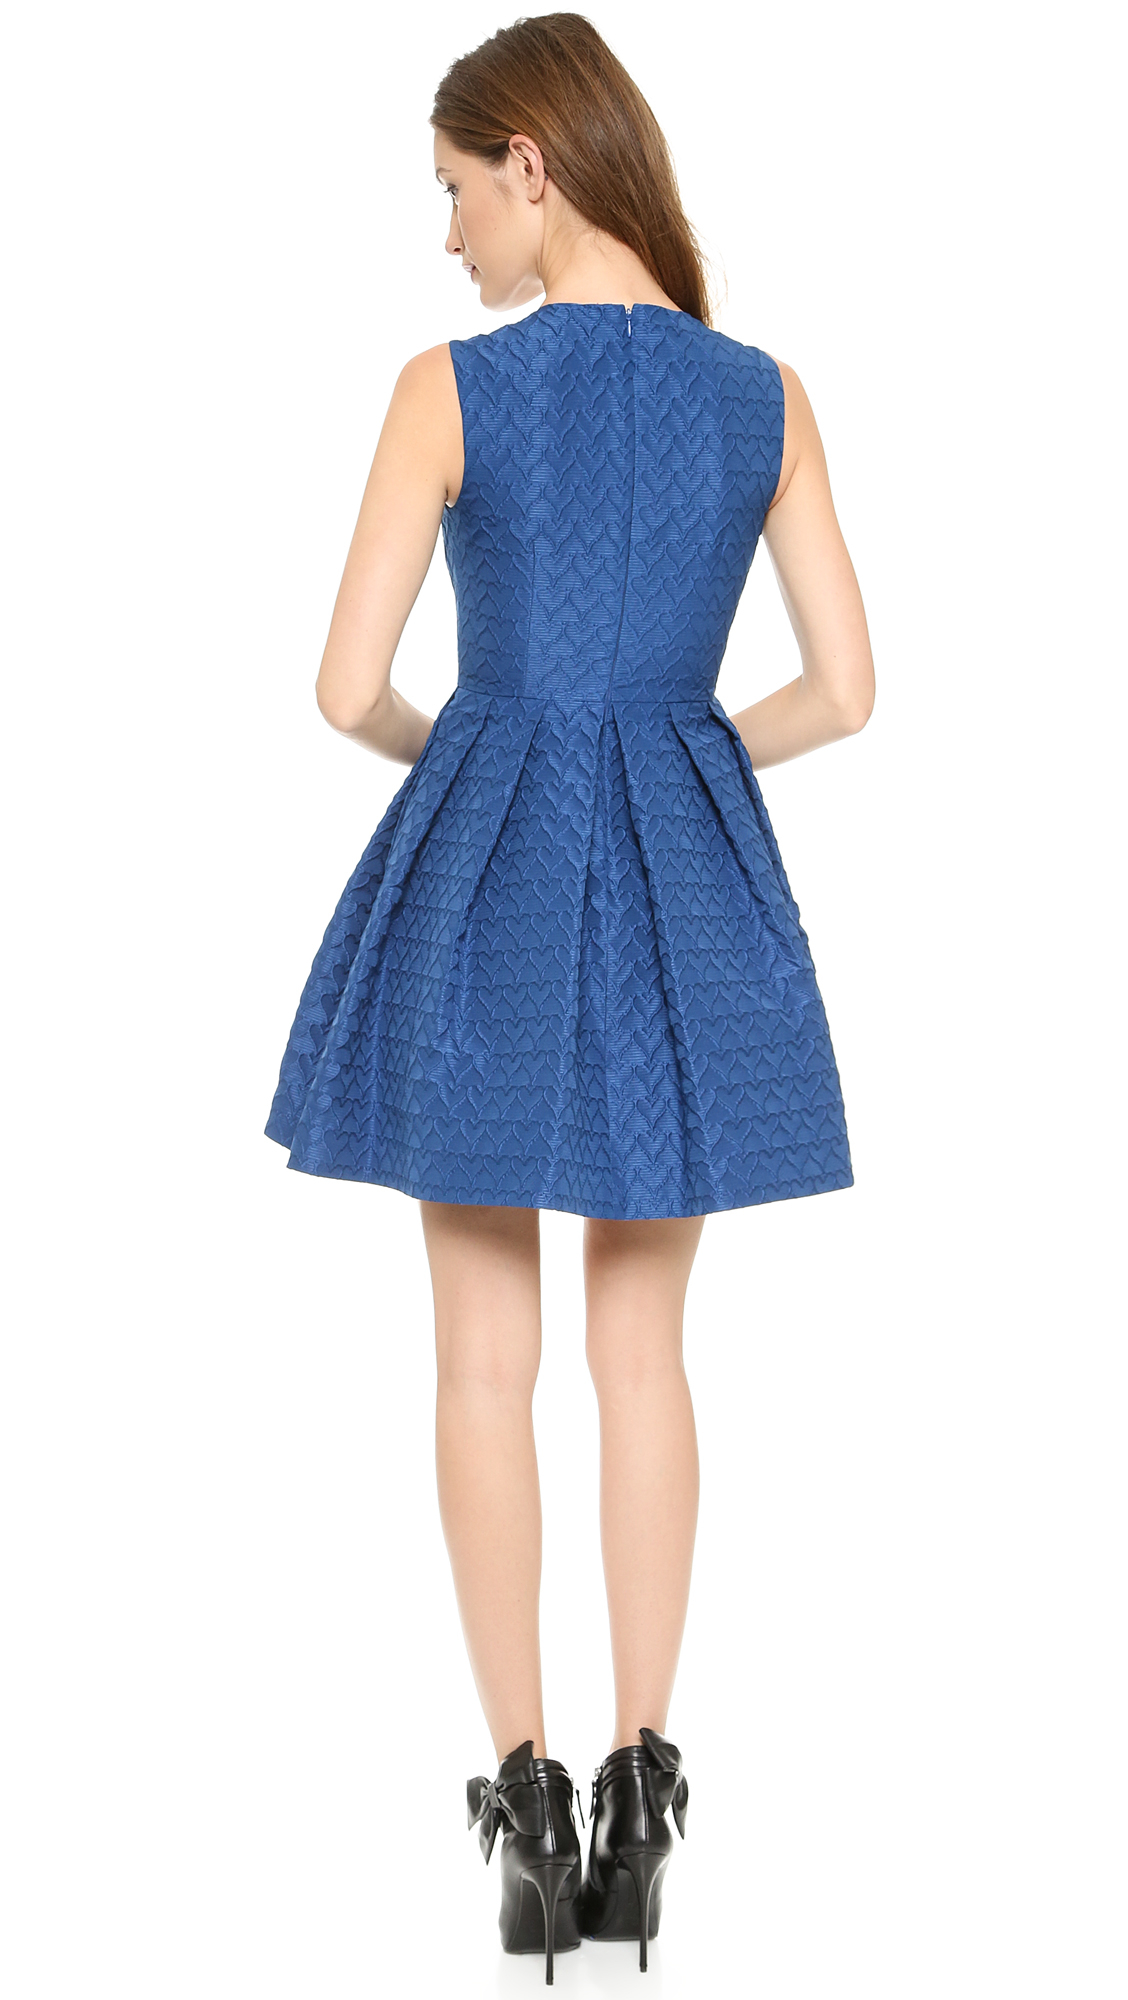 RED Valentino Heart Faille Dress Cobalt in Blue - Lyst